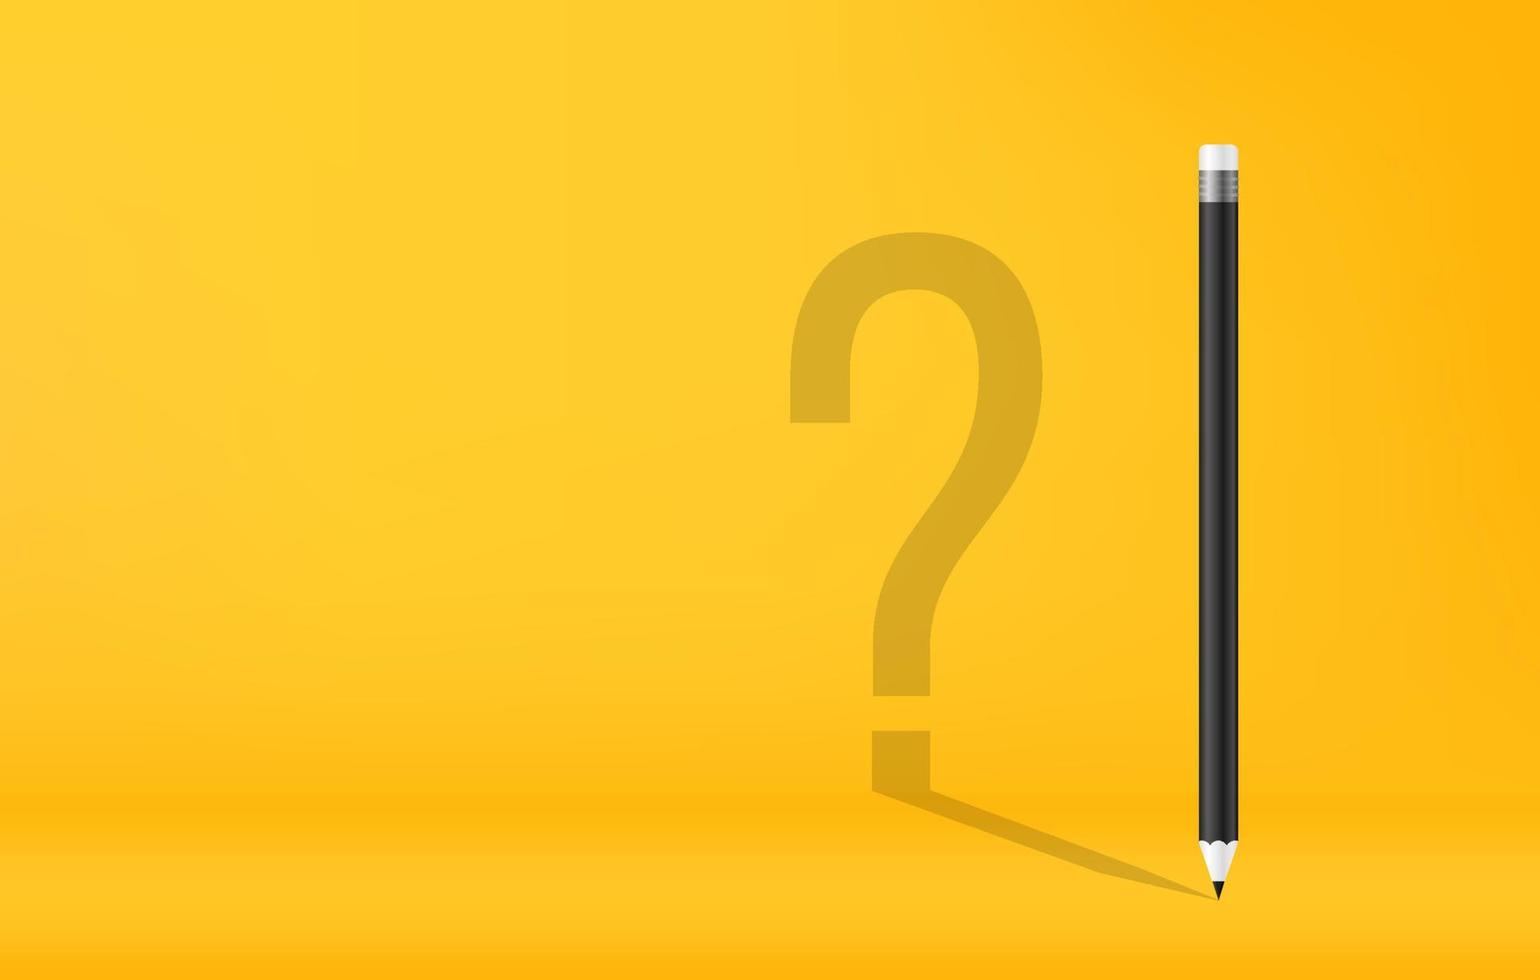 Pencils with question mark shadow on yellow background vector